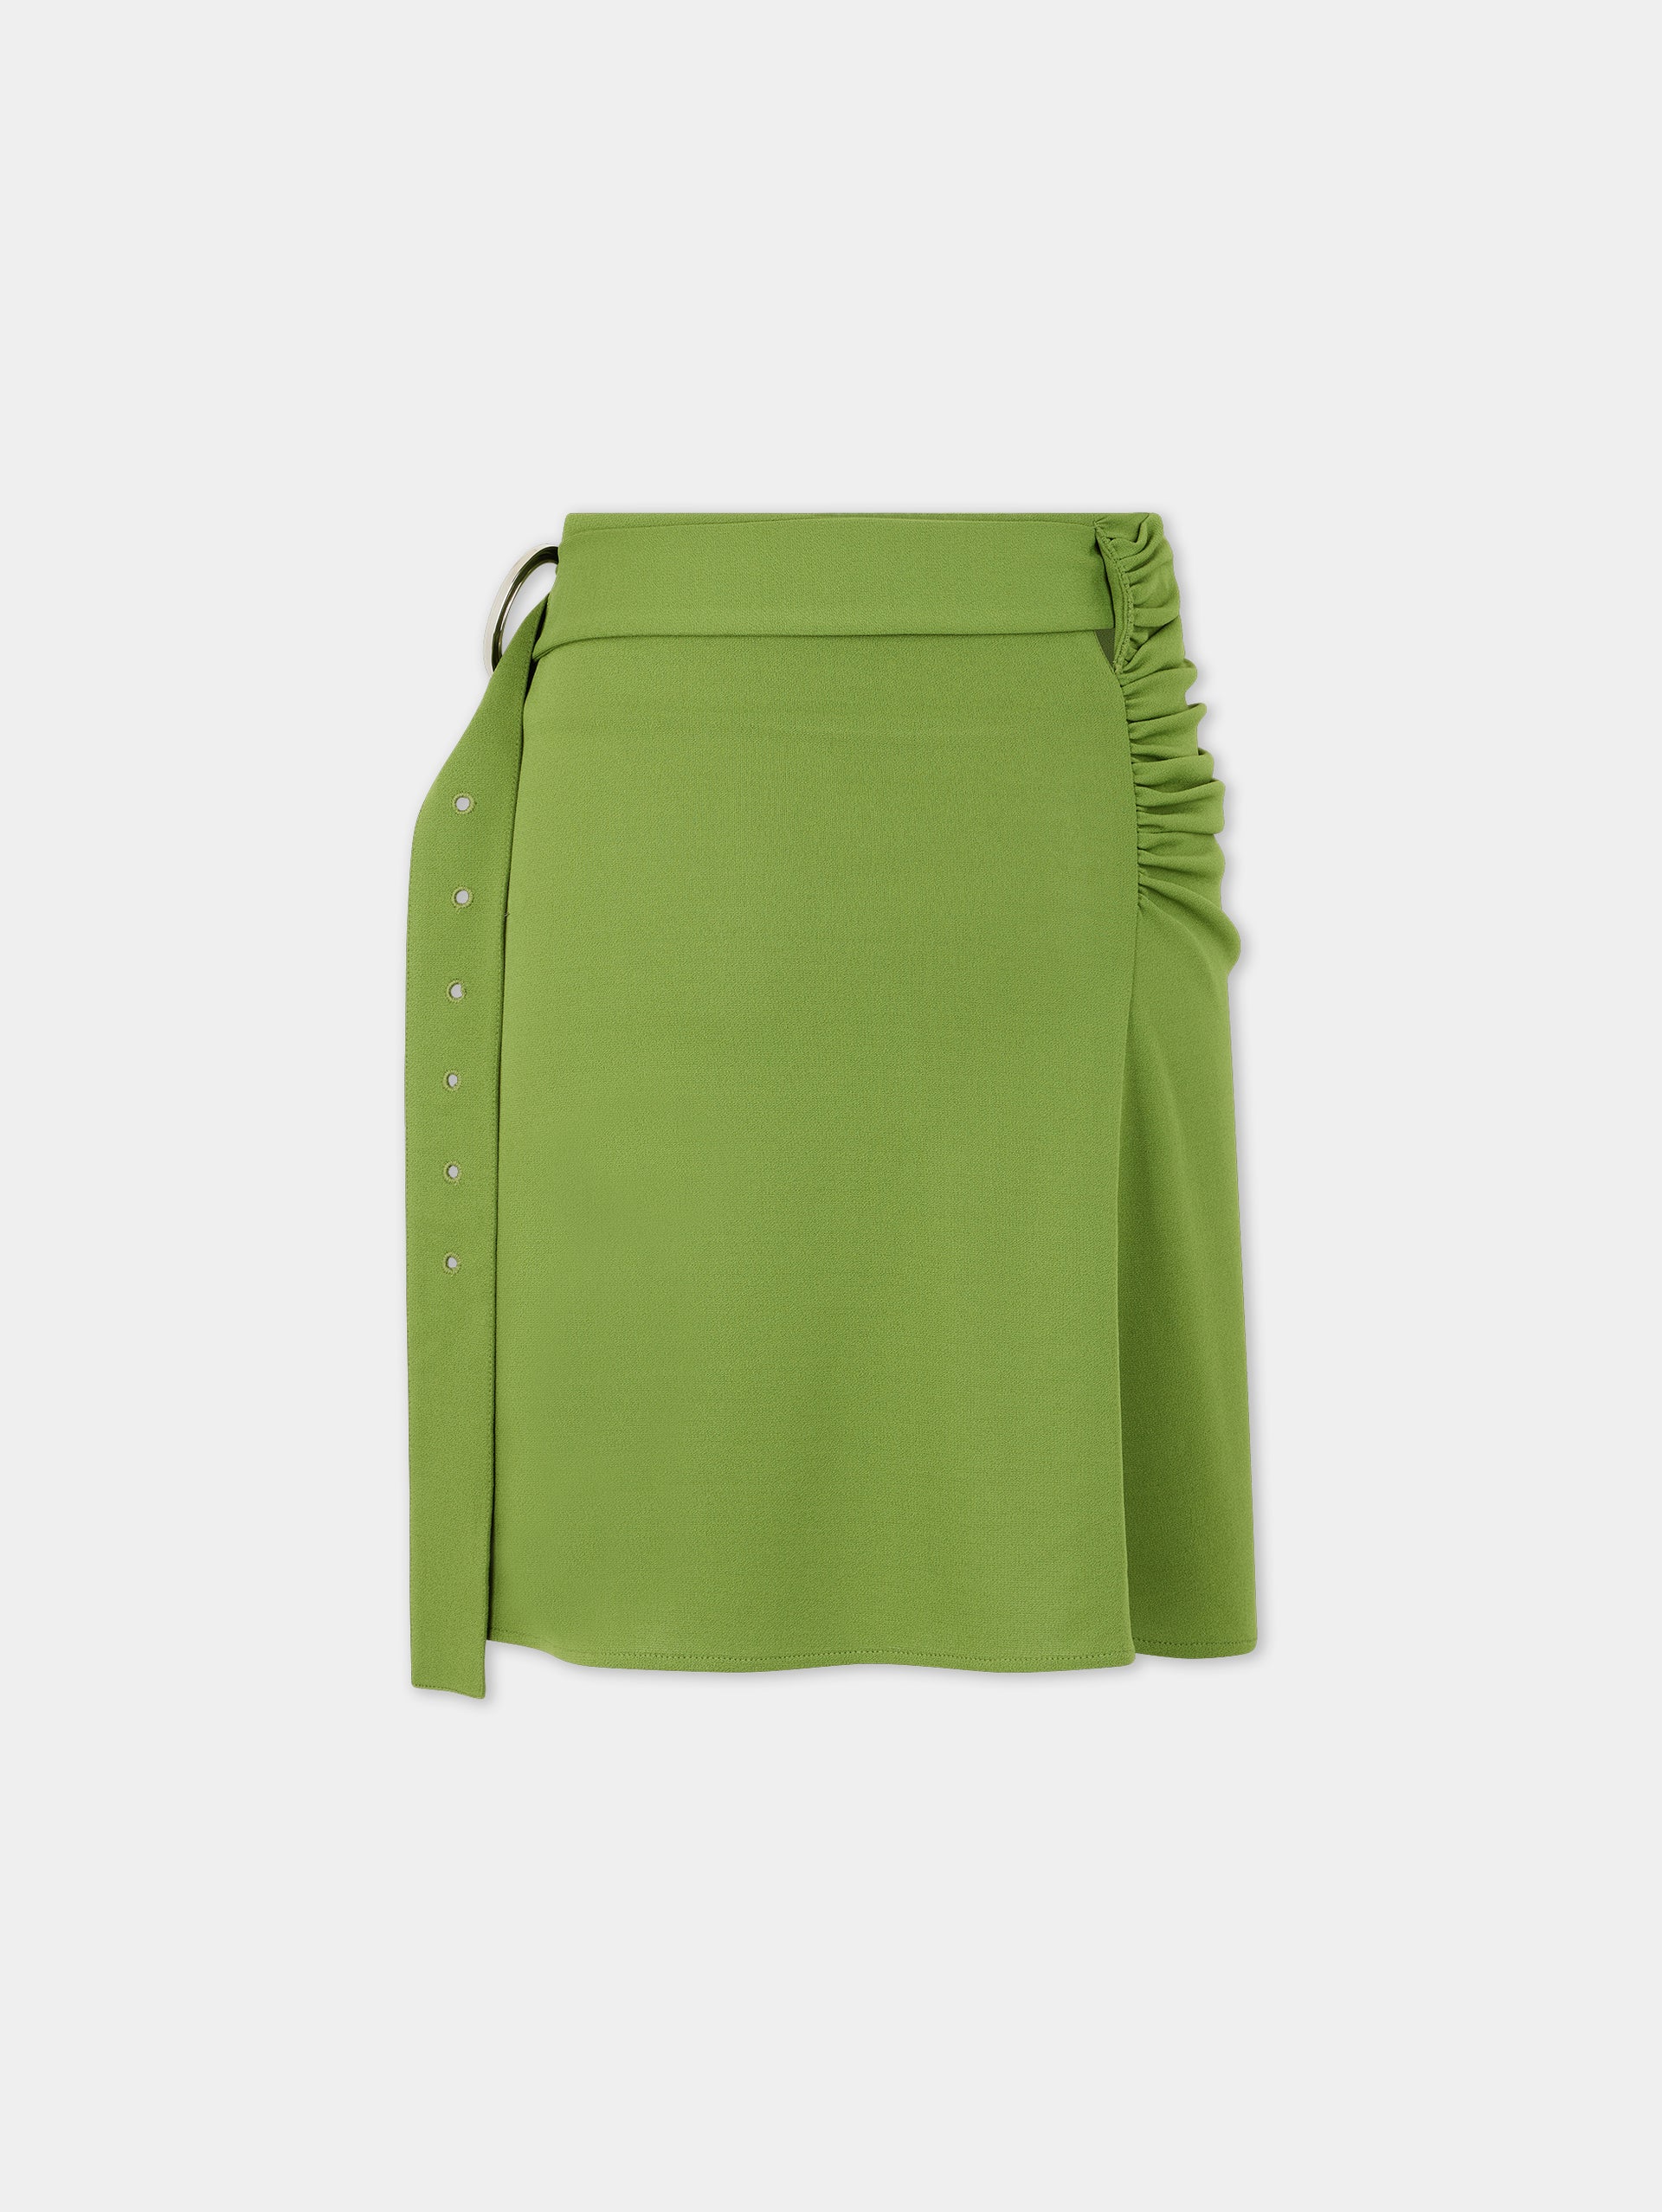 Green draped skirt with piercing detail